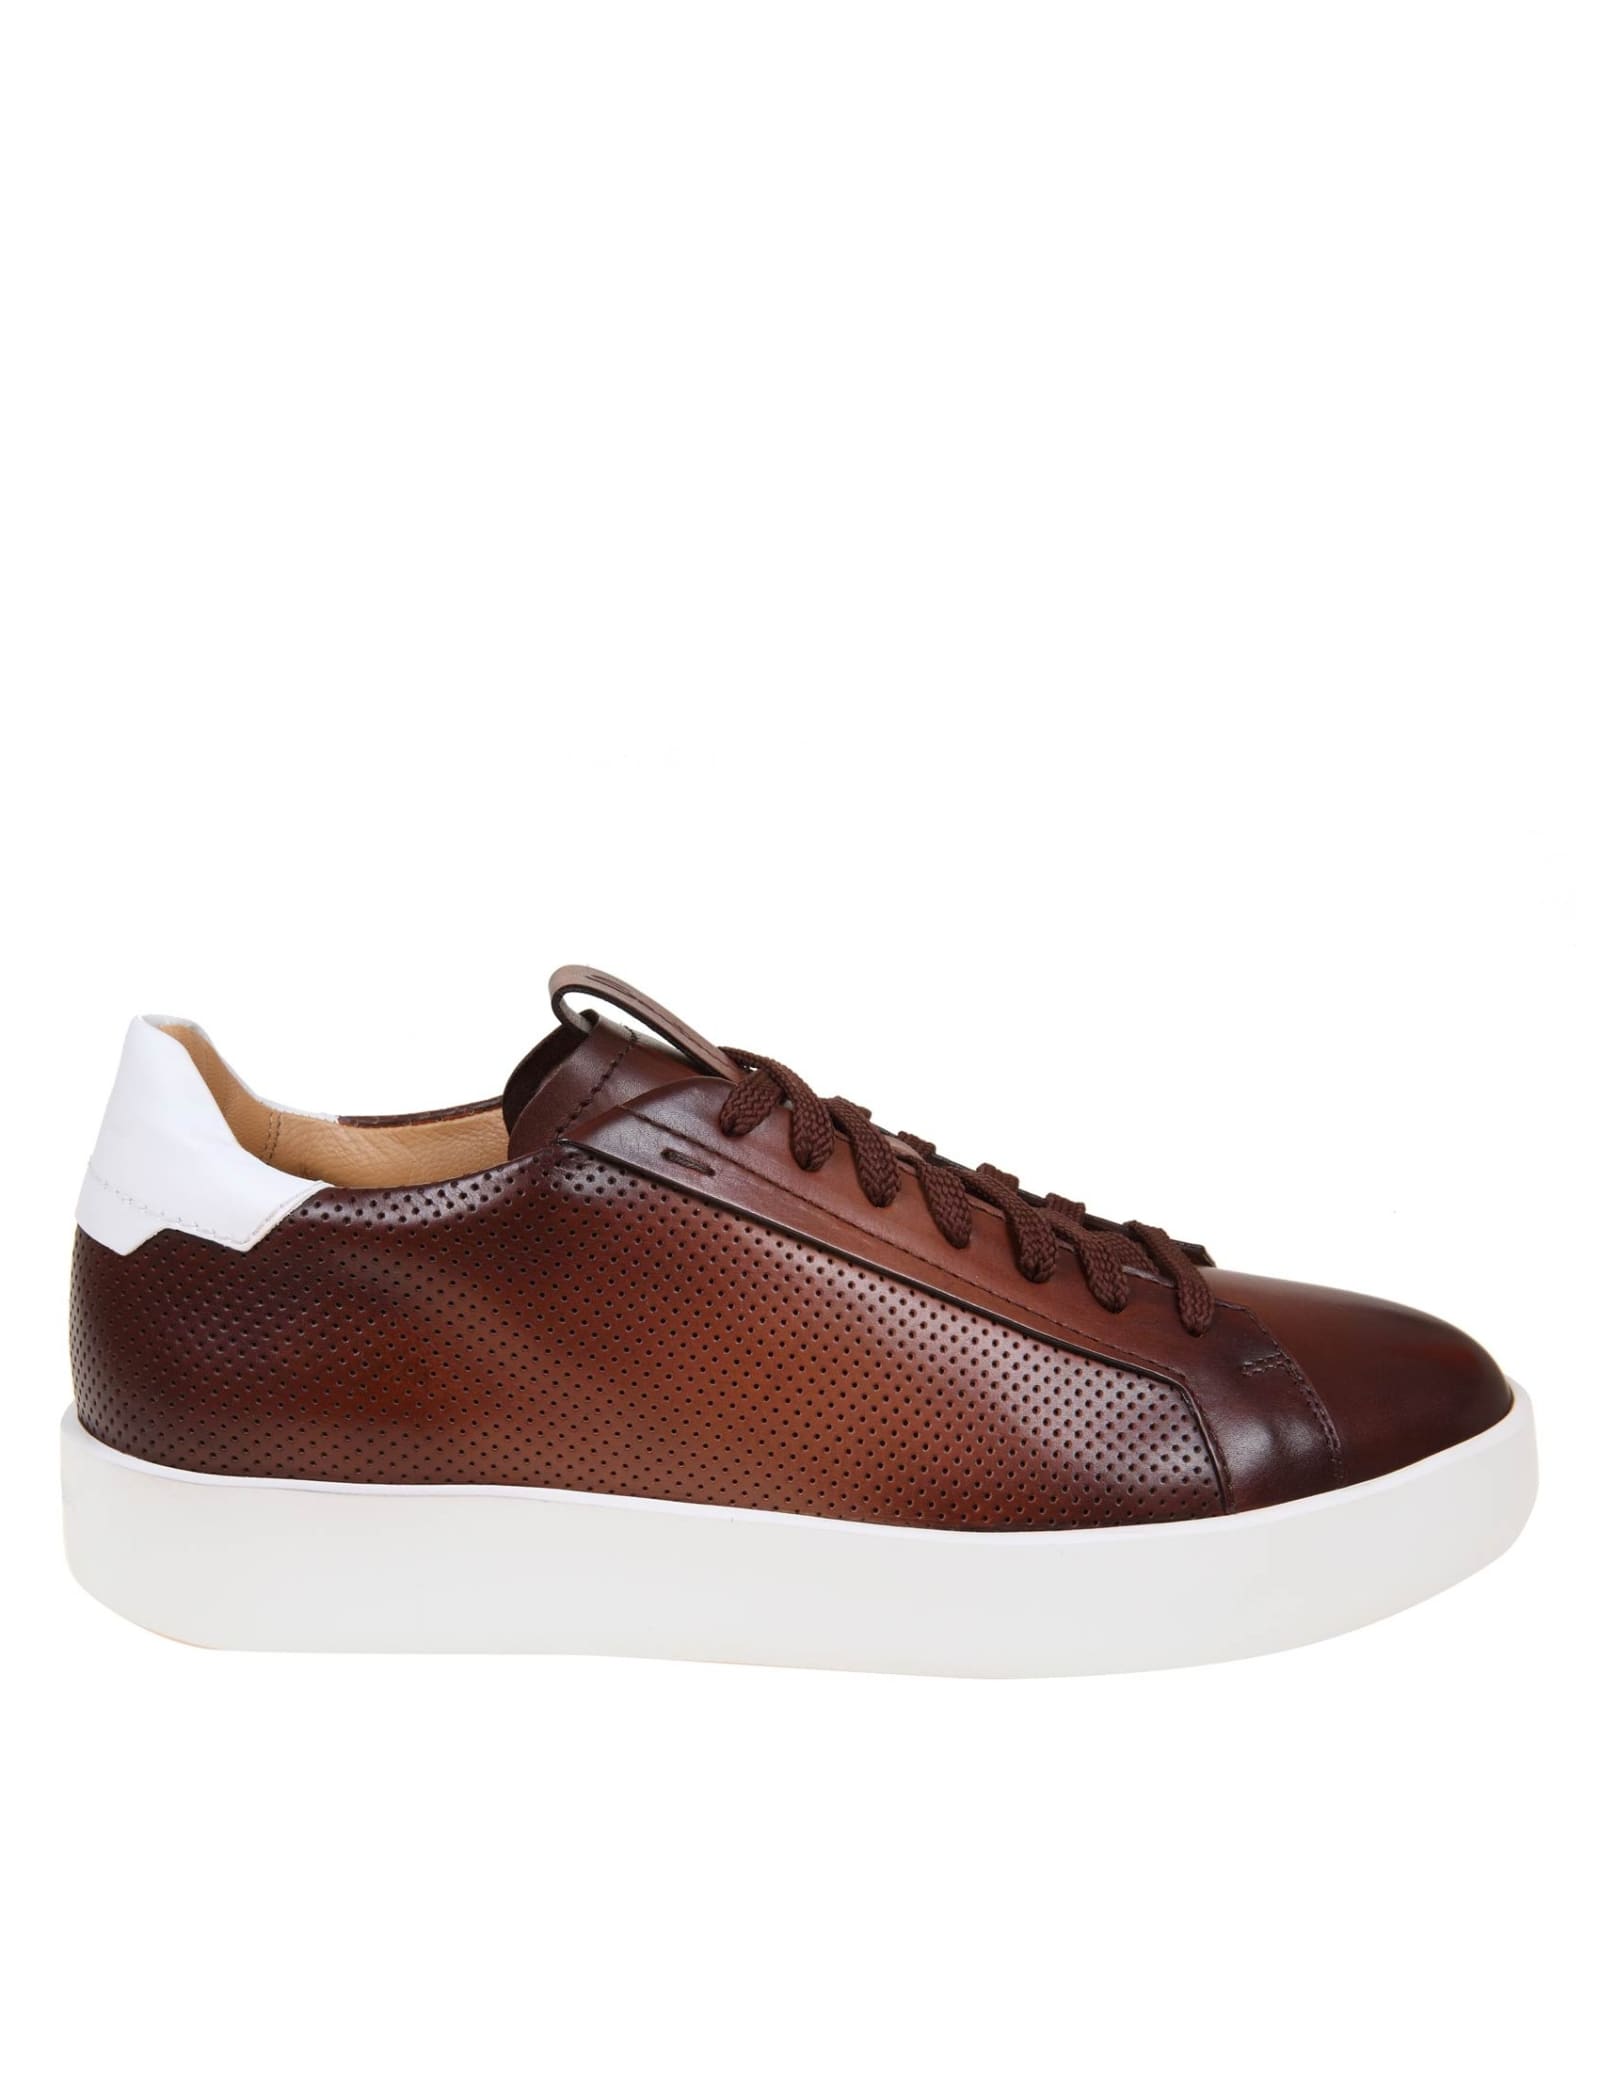 Santoni Sneakers In Leather Burnt Color Man Brown New Collection